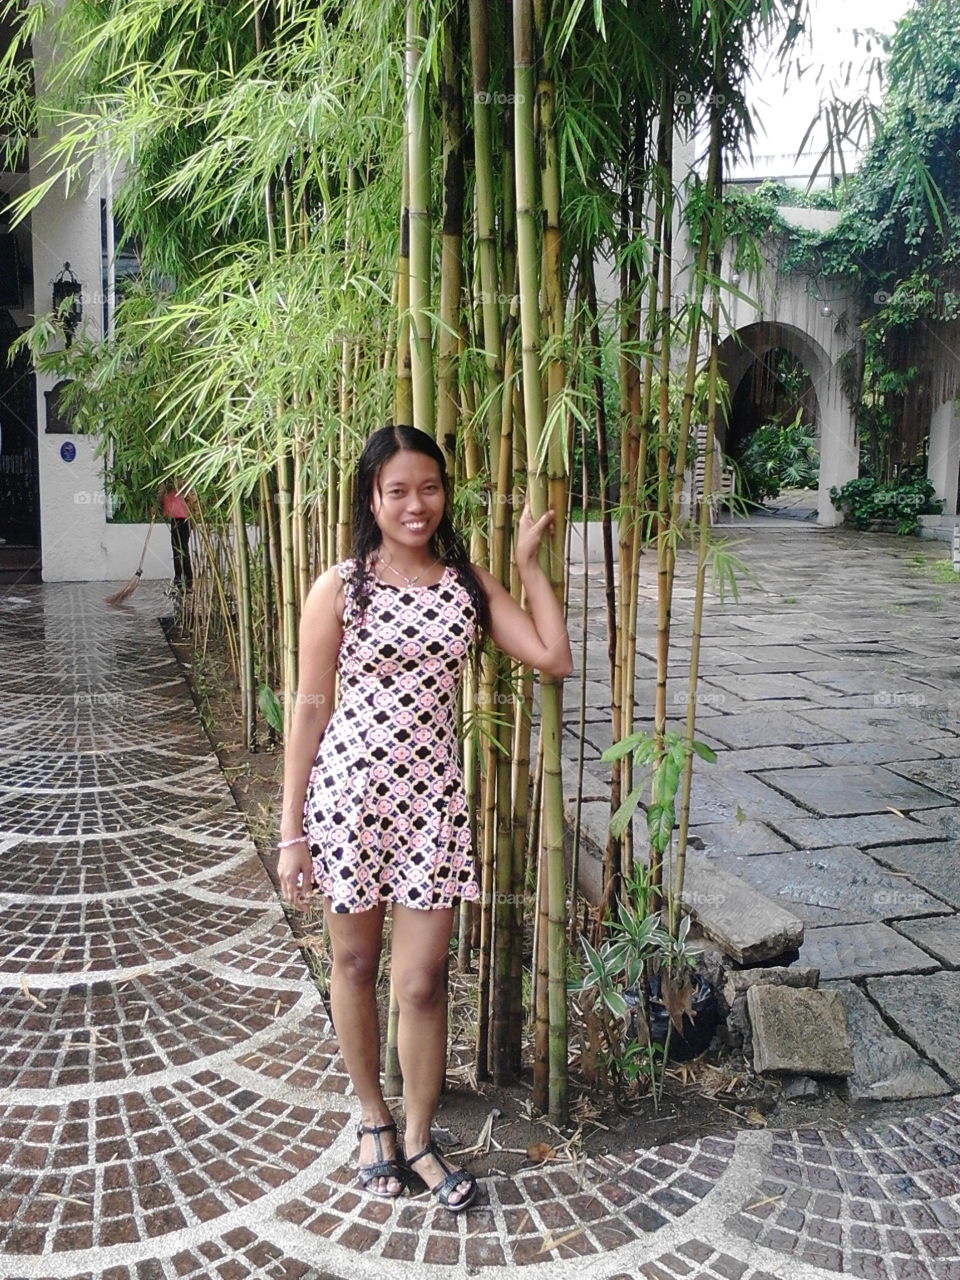 captured with the bamboo tree